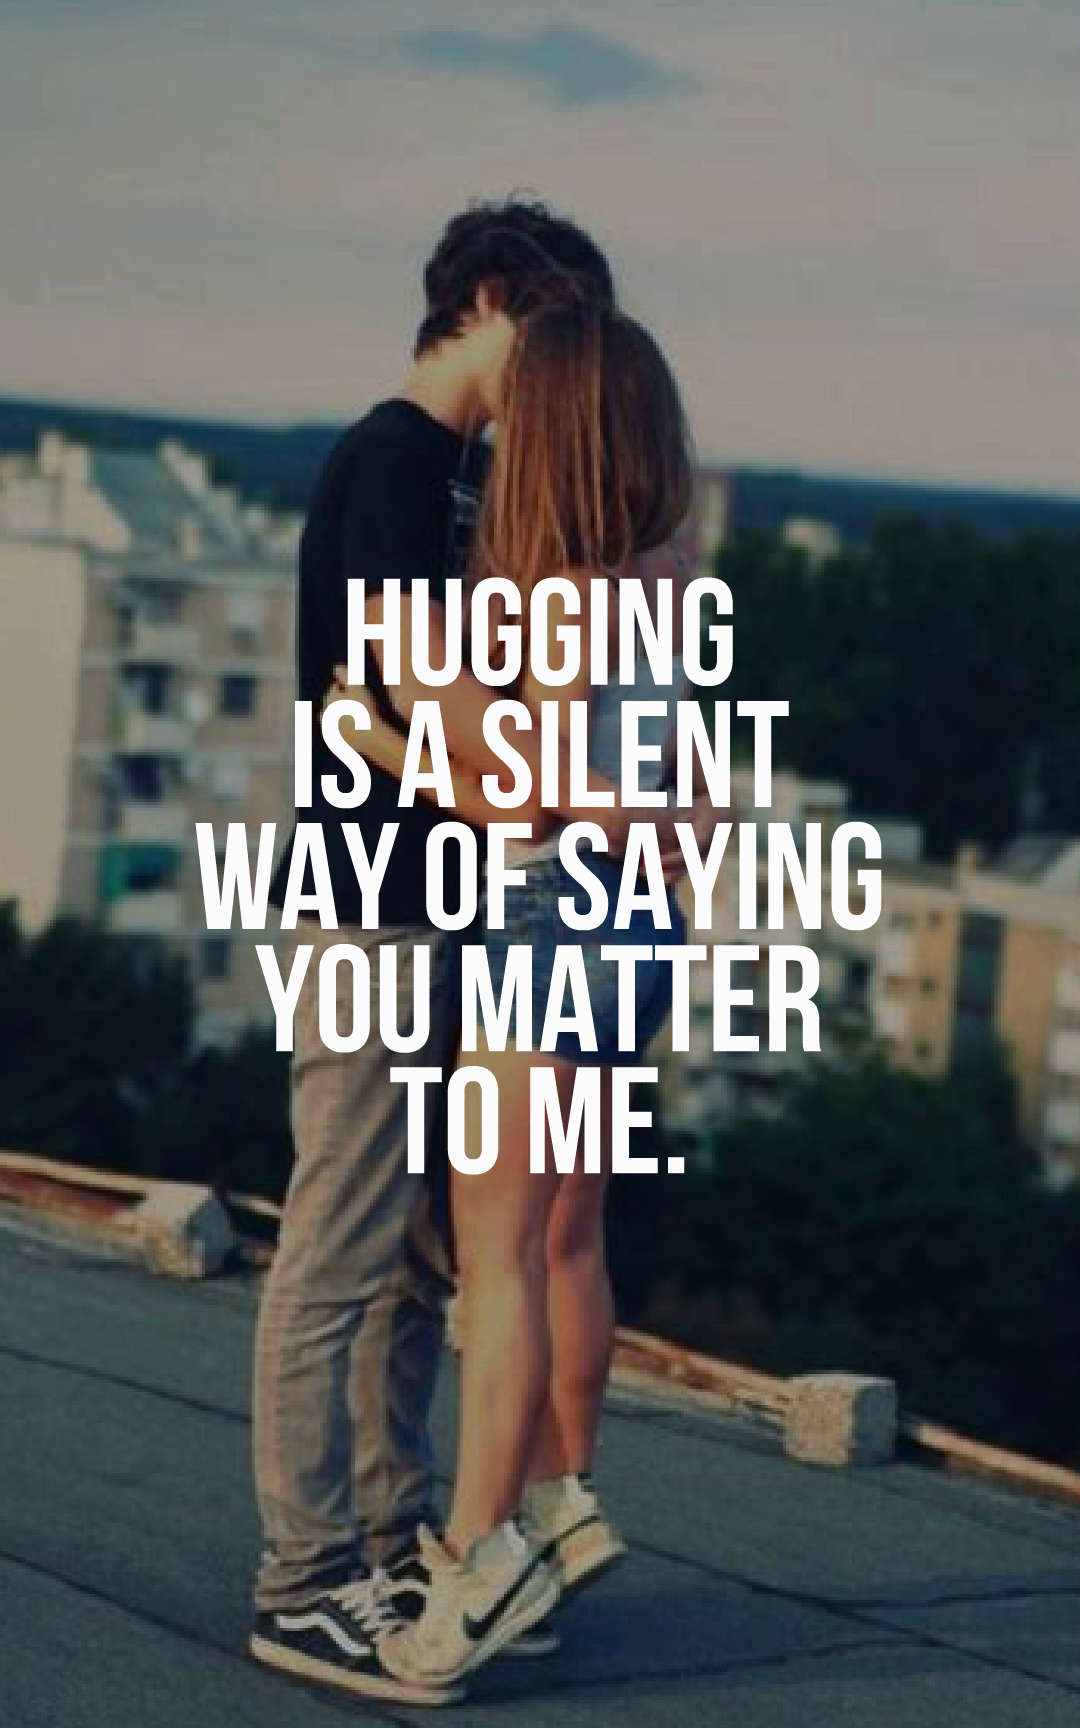 Hugging is a silent way of saying you matter to me.